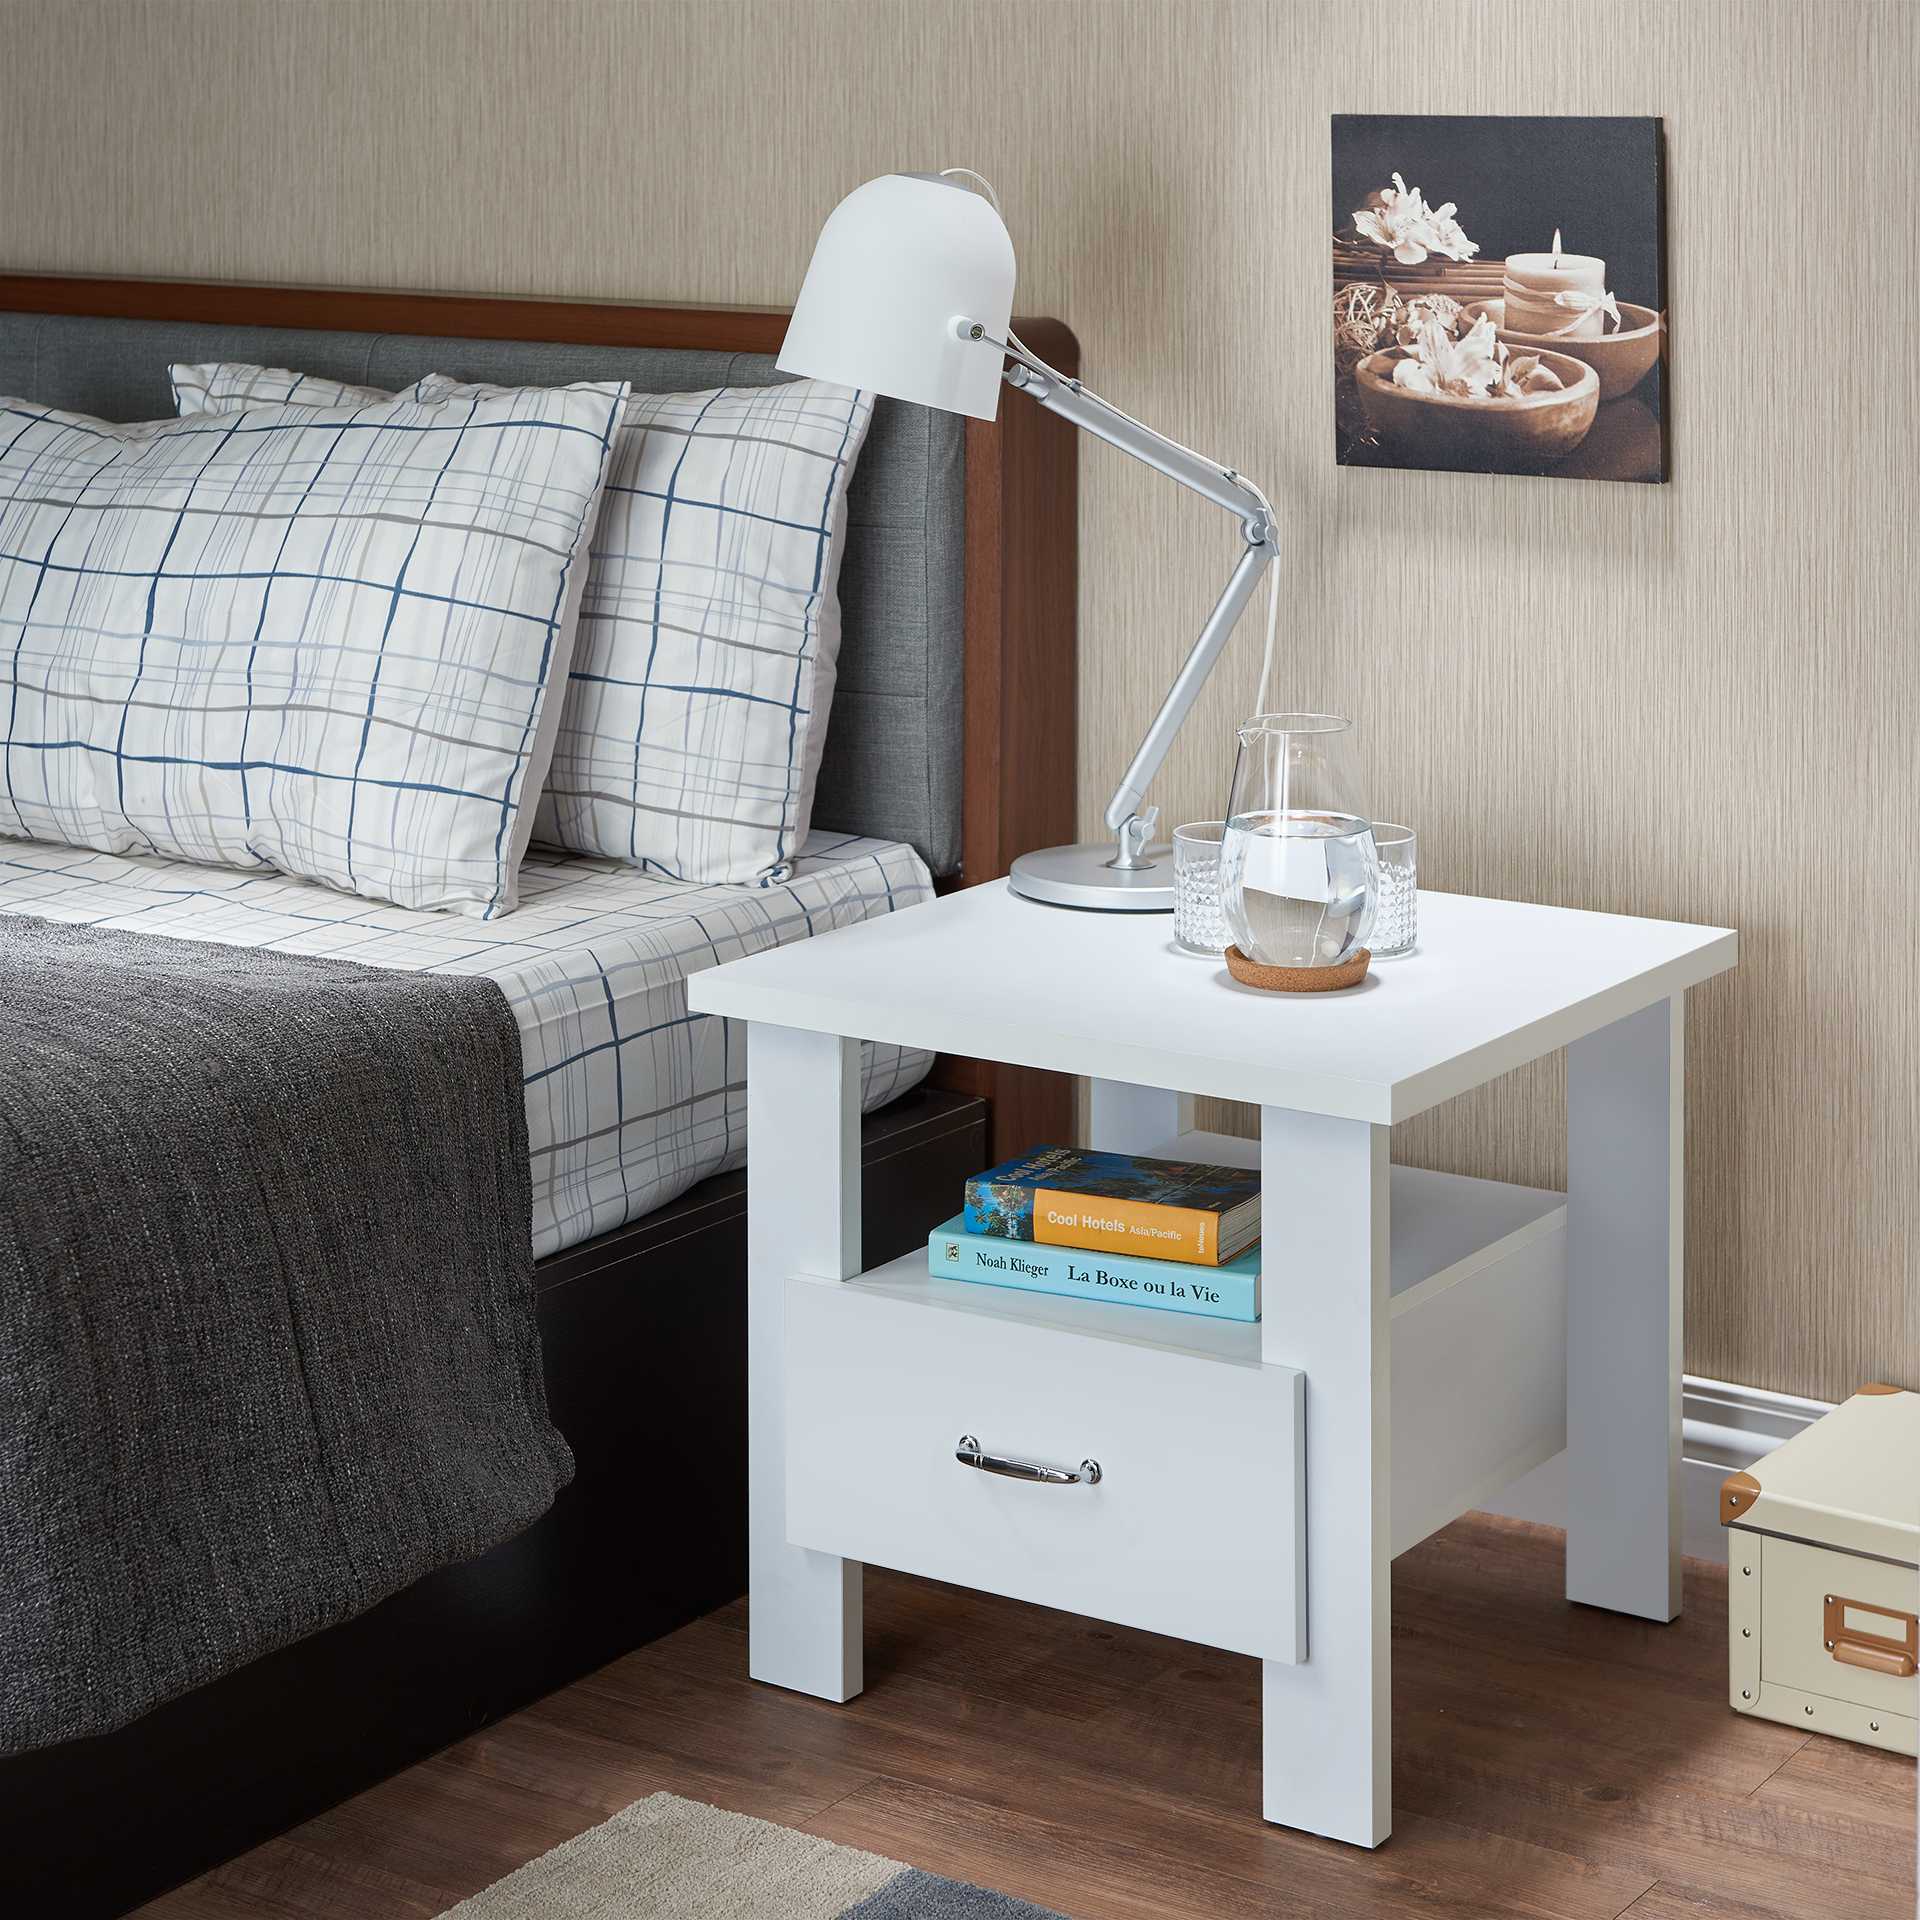 22" X 22" X 20" White Particle Board Nightstand